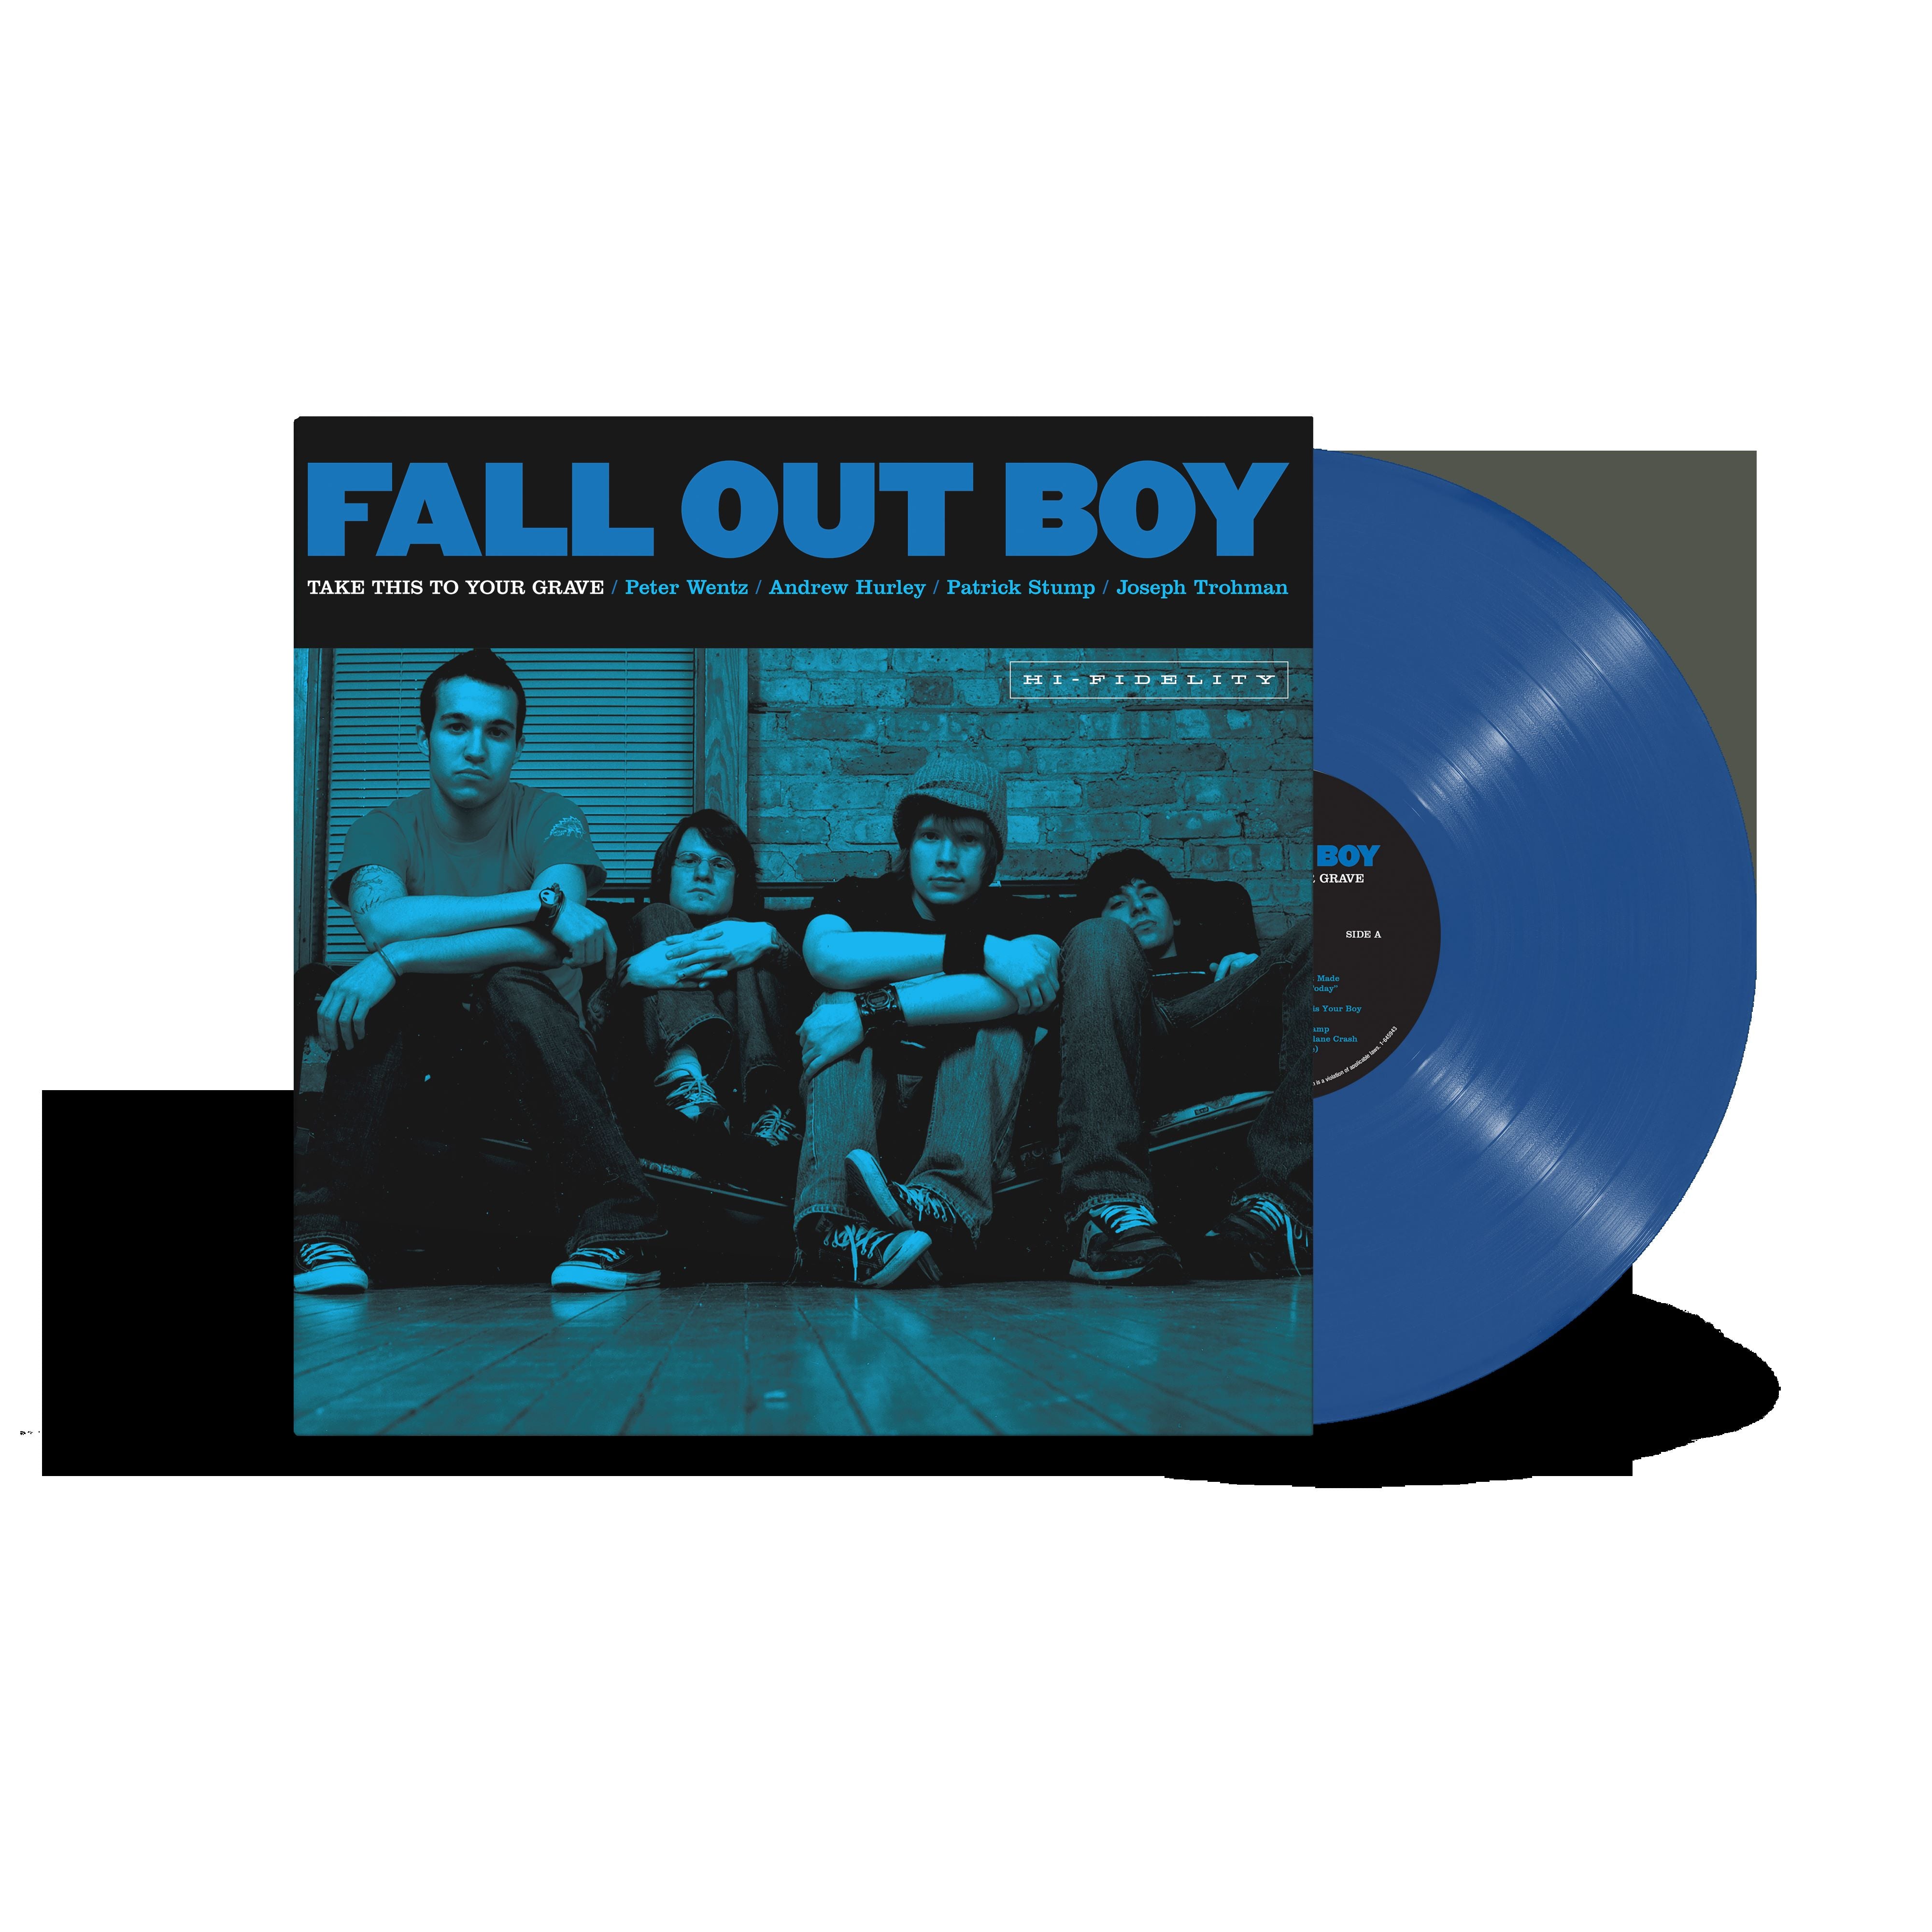 Fall Out Boy - Take This To Your Grave 20th Anniversary (Blue Vinyl)